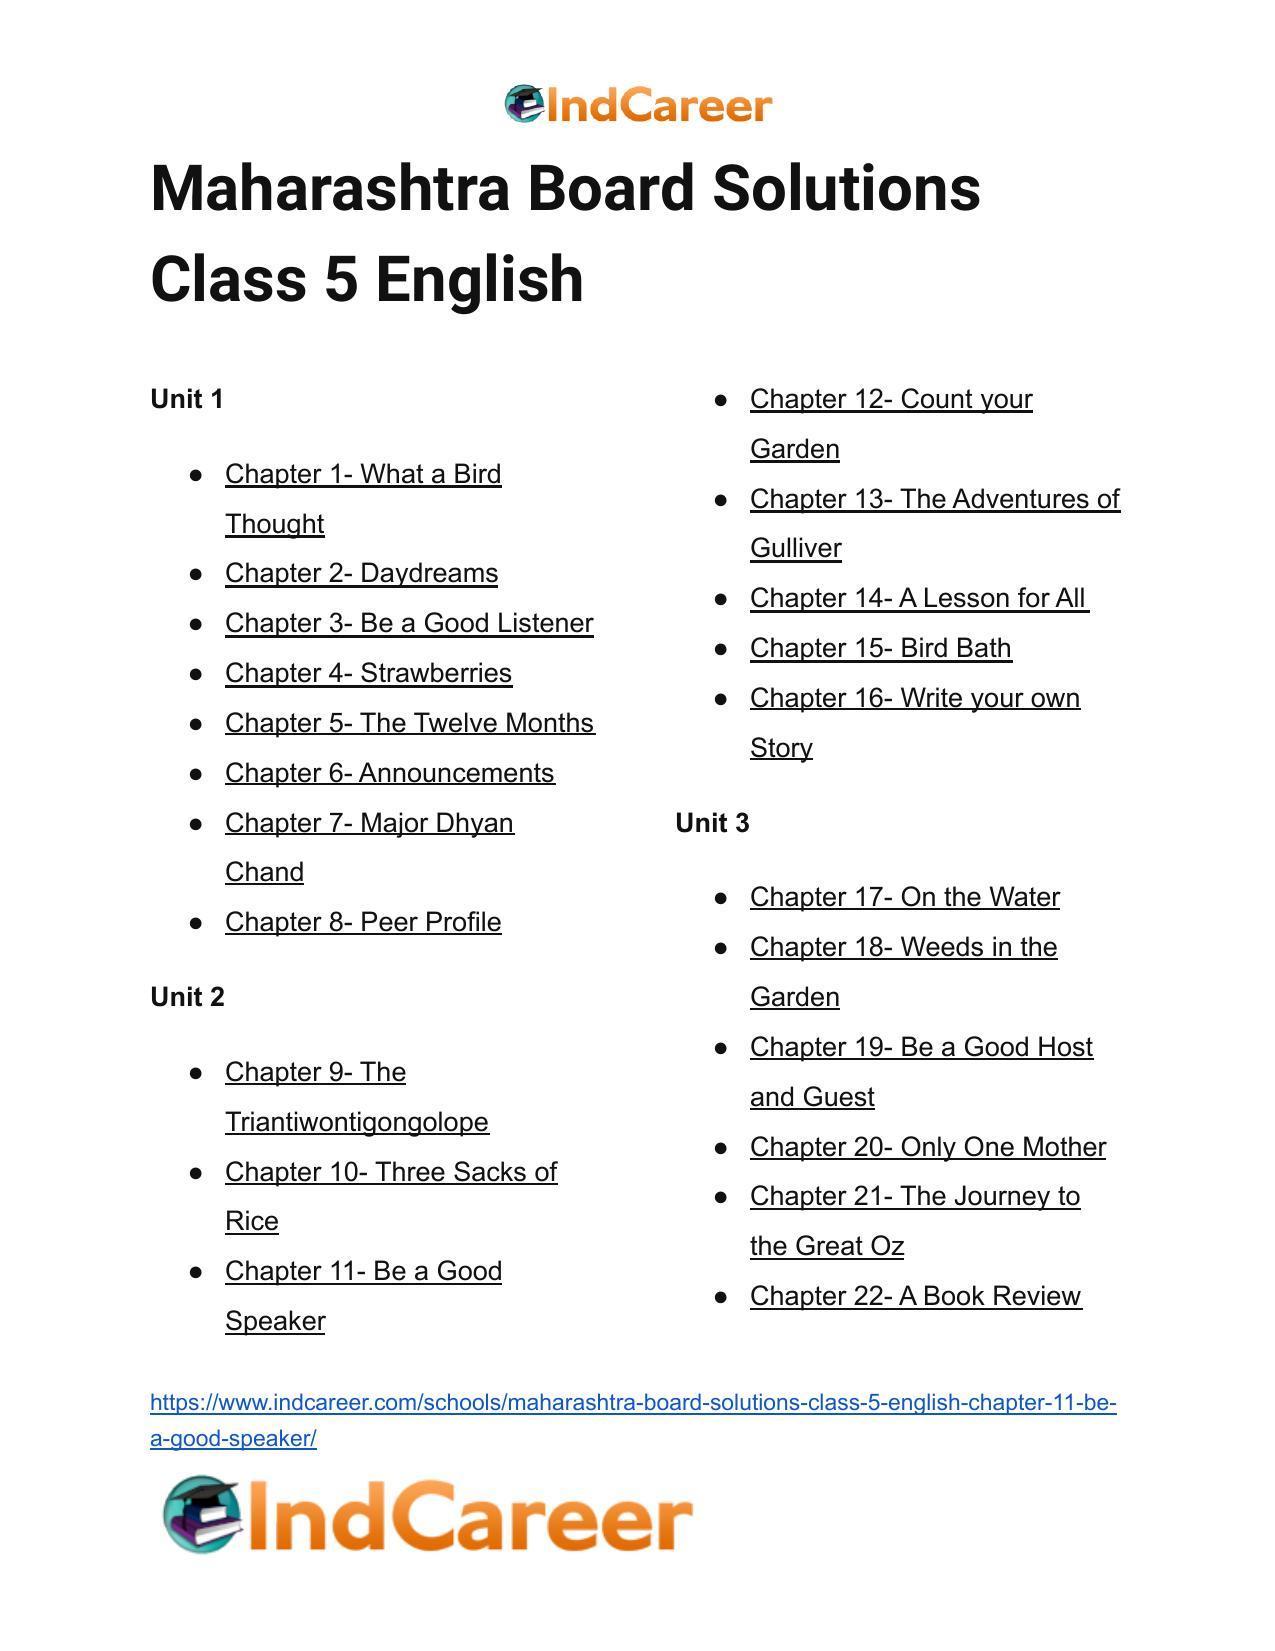 Maharashtra Board Solutions Class 5-English: Chapter 11- Be a Good Speaker - Page 8